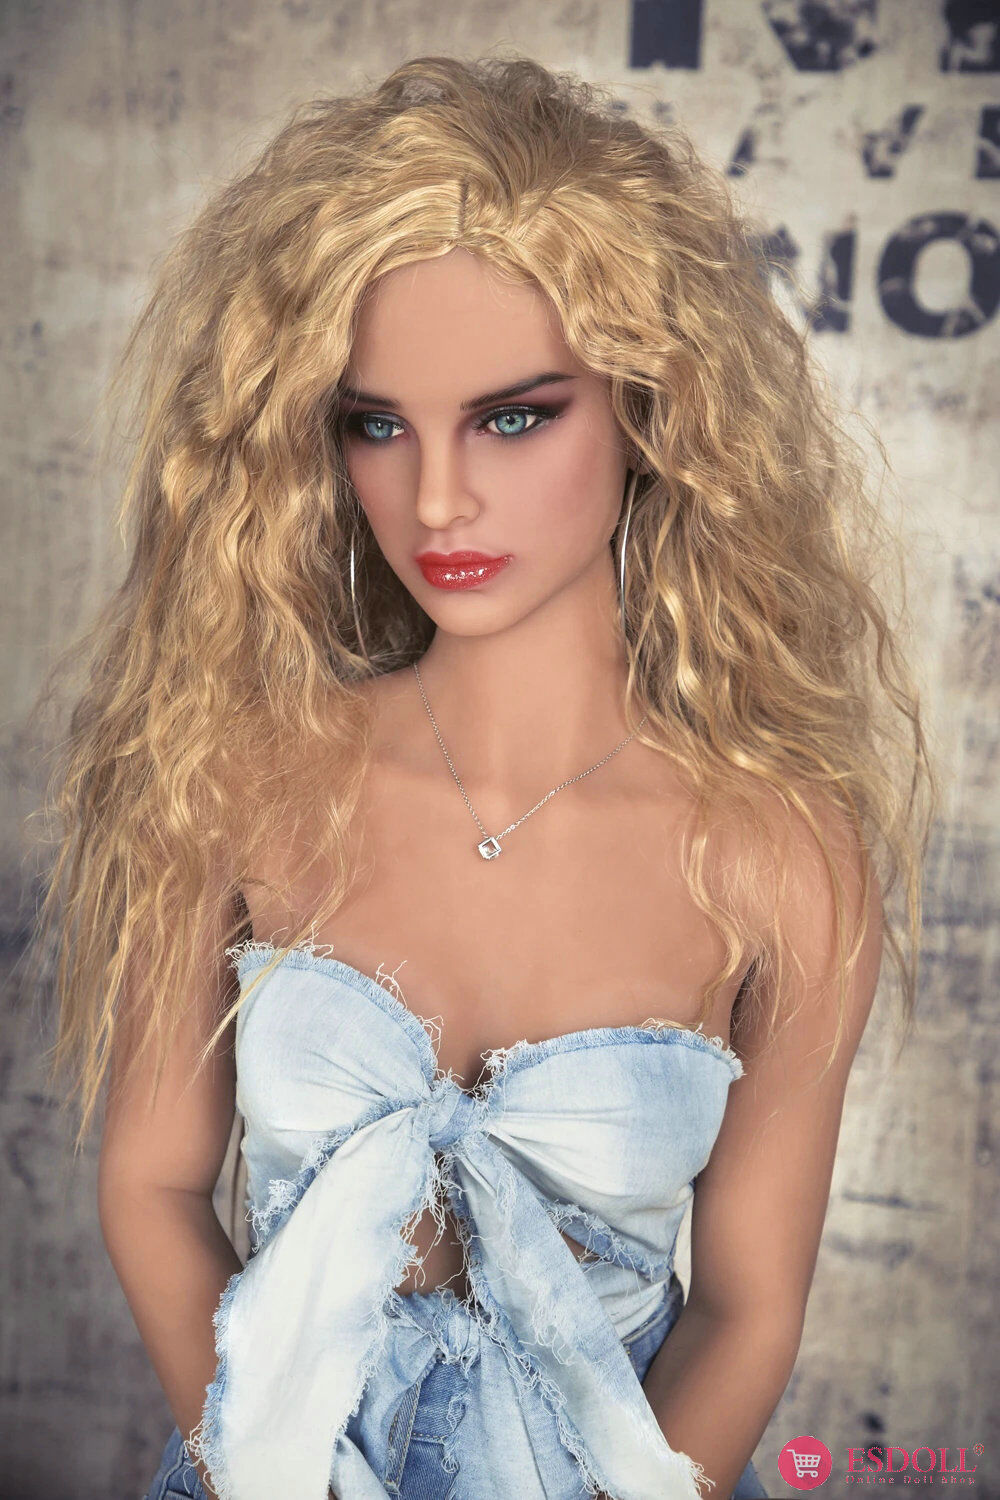 Prom Girl 160cm Blonde Sex Doll For Sex Party Shelby